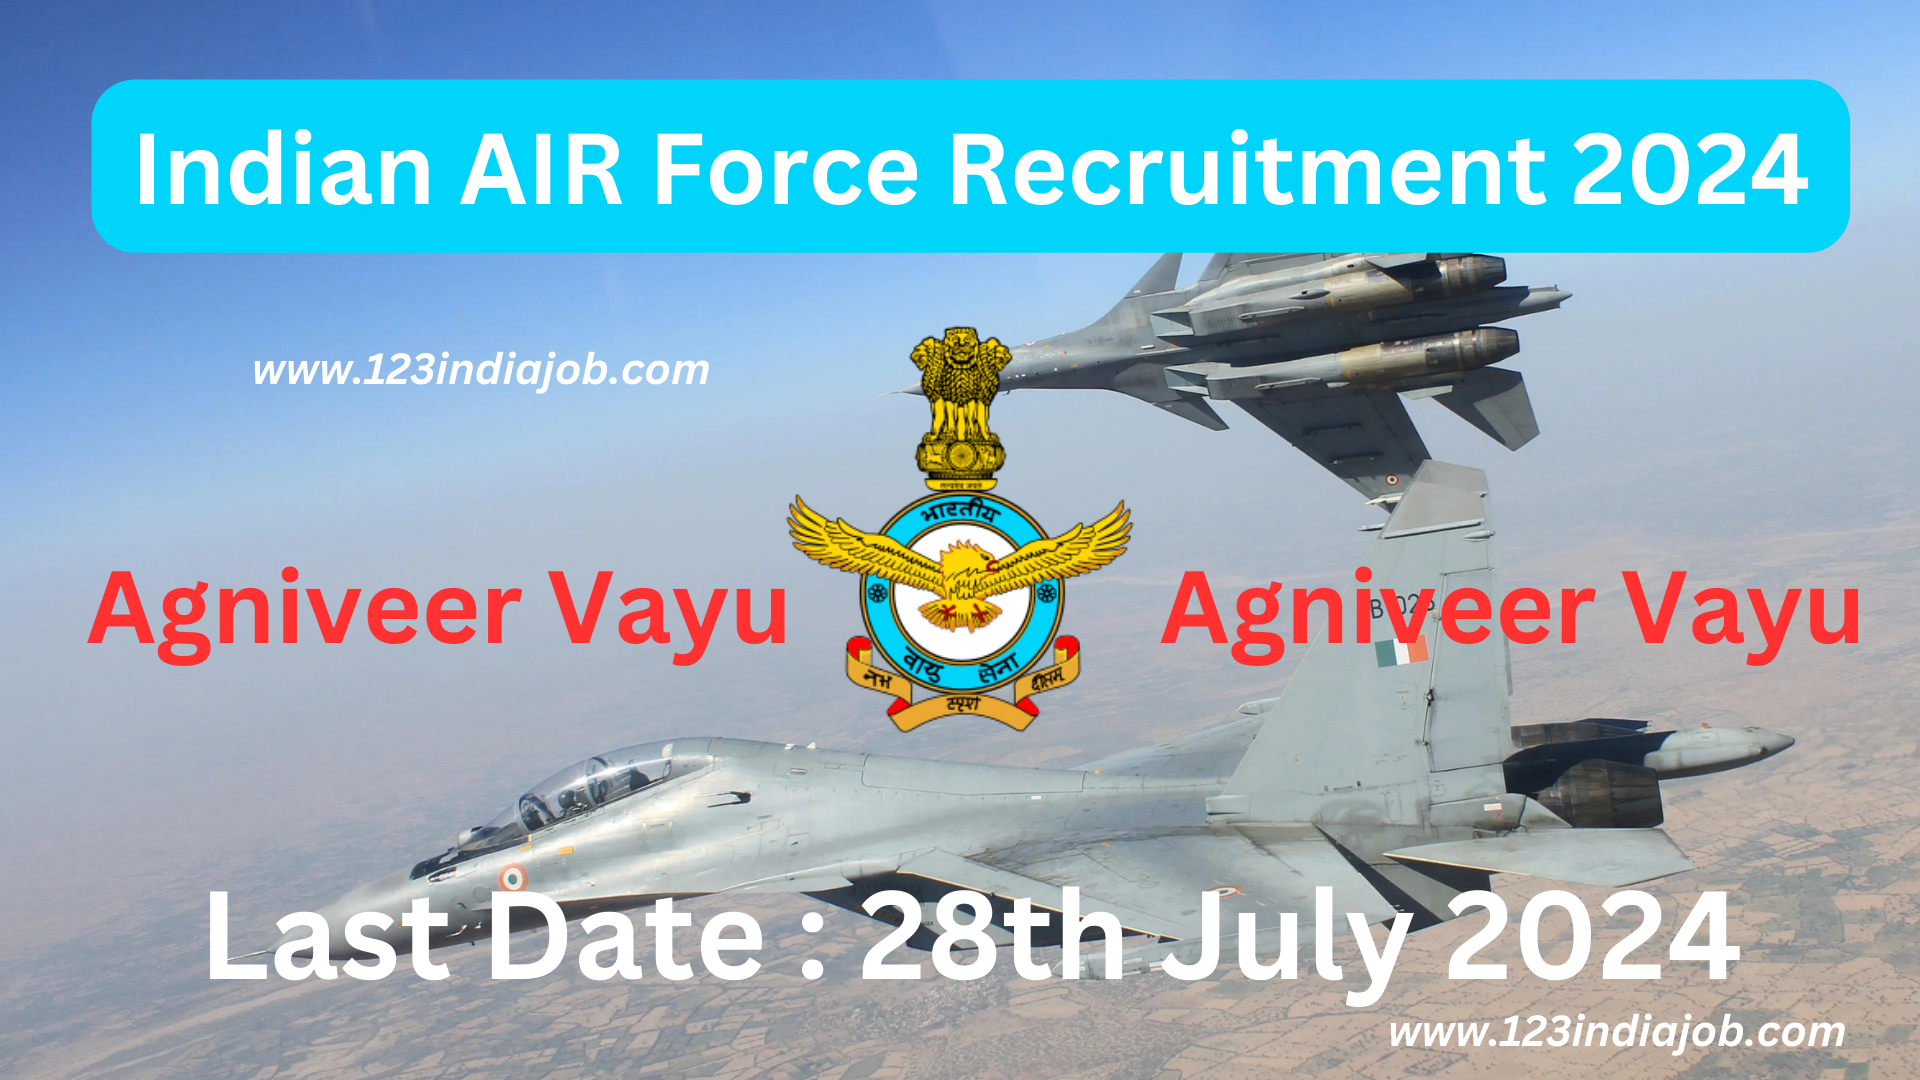 Indian AIR Force Recruitment 2024 – Apply for Agniveer Vayu Online Here !